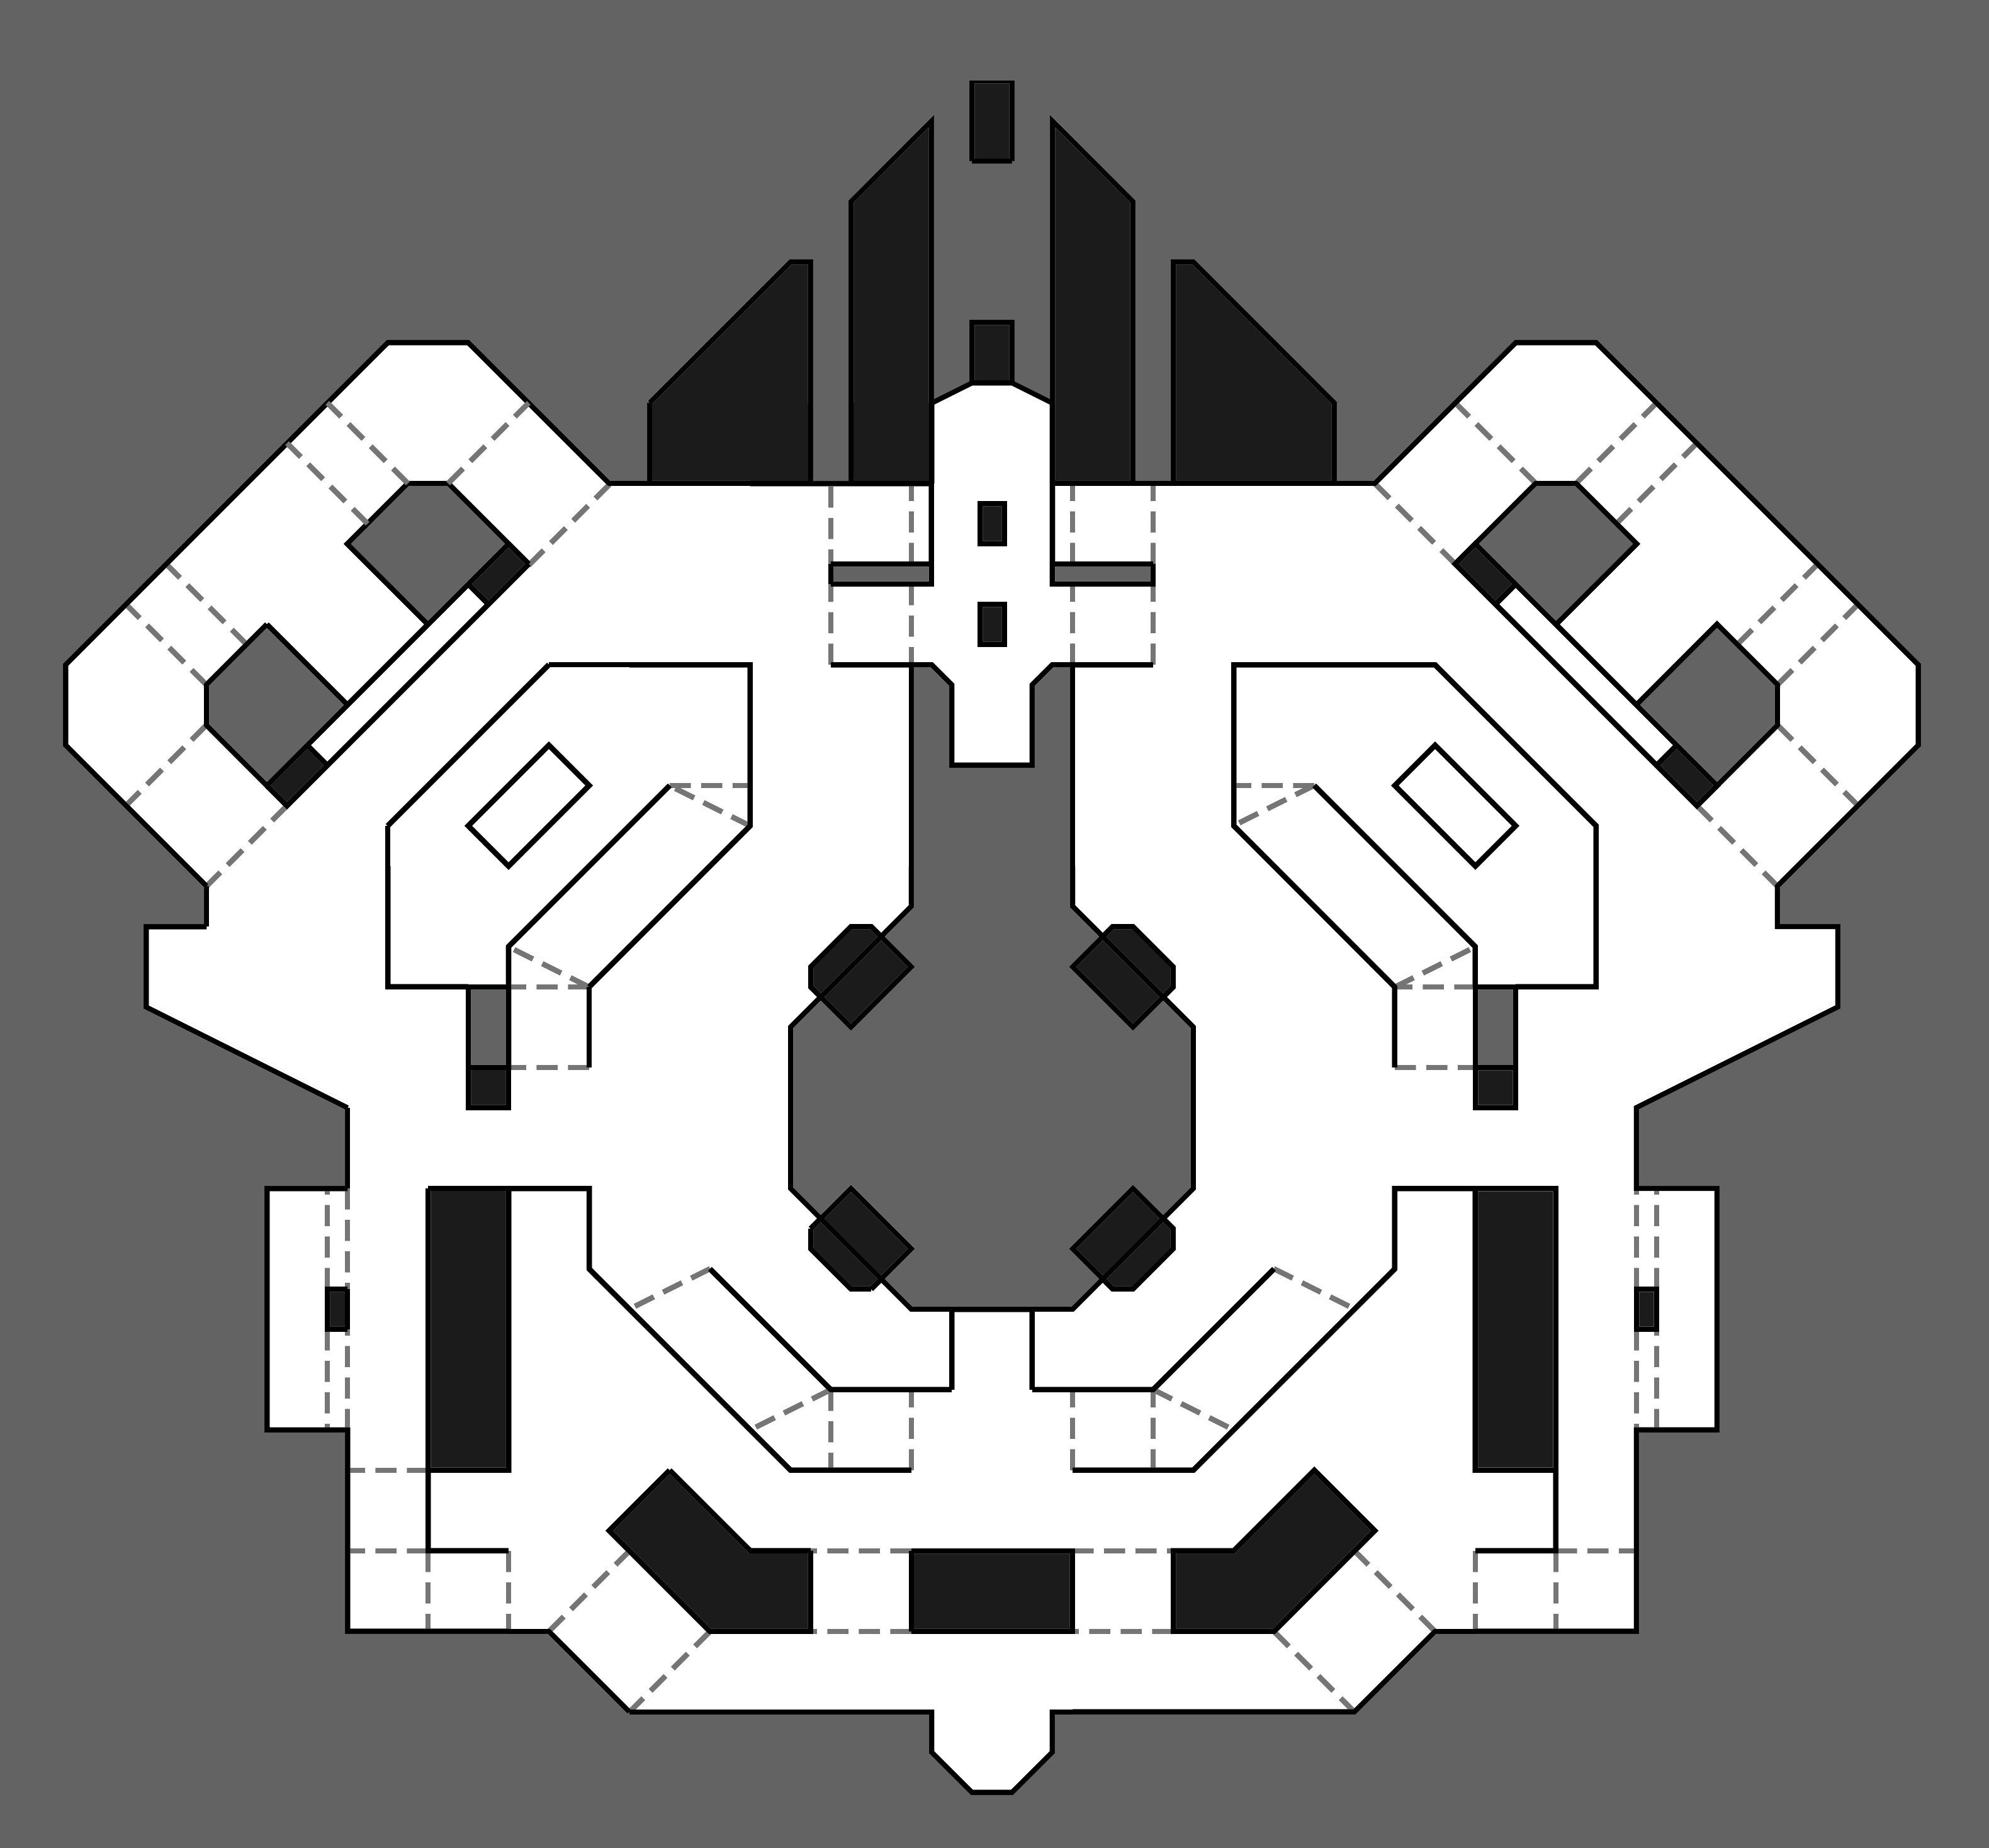 A topdown layout for the map. This was made in pre-production for the level to work from when building the blockout.